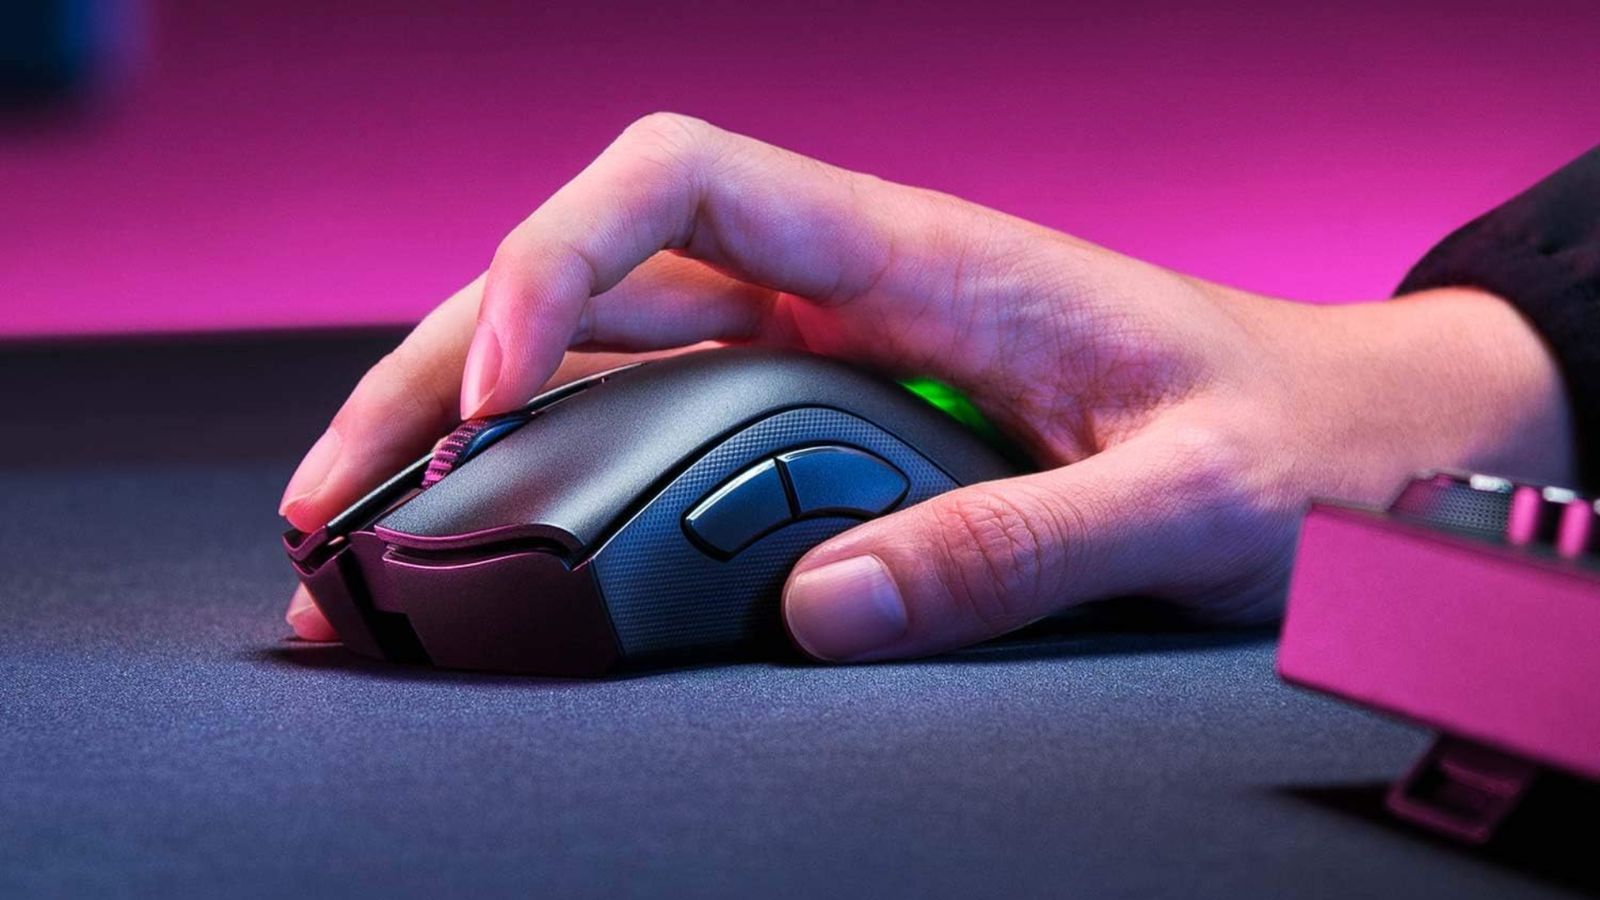 Someone with their hand on a black wireless gaming mouse featuring green lighting on top.